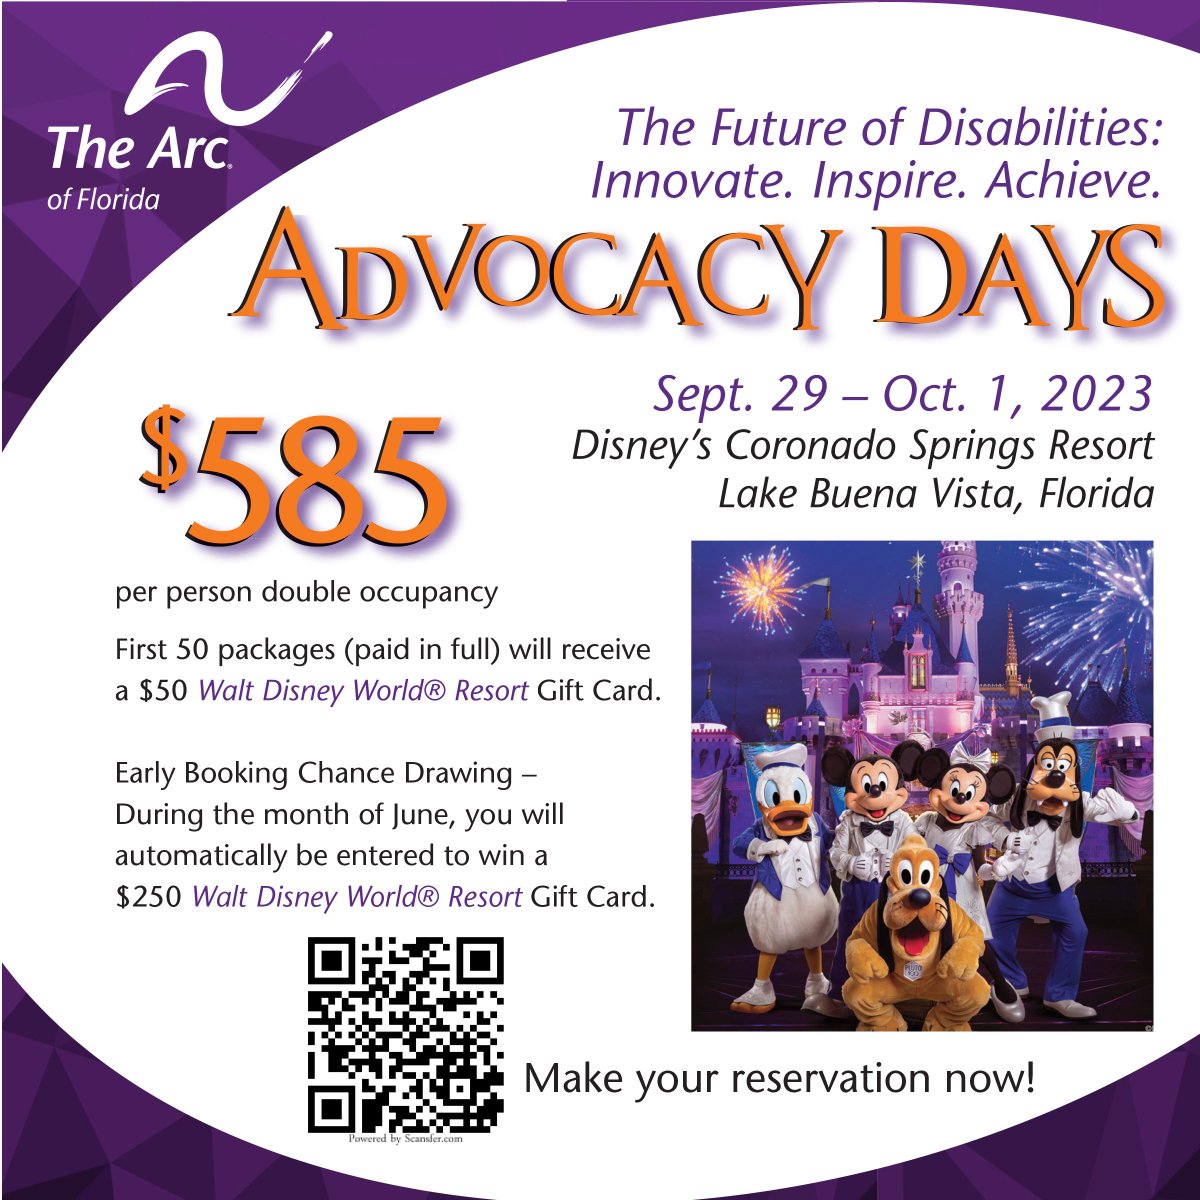 If you make your reservation for our 1st Annual Advocacy Days during the month of June, you will automatically be entered to win a $250 Walt Disney World® Resort Gift Card. How cool! #AdvocacyDays #Disney #AchieveWithUs